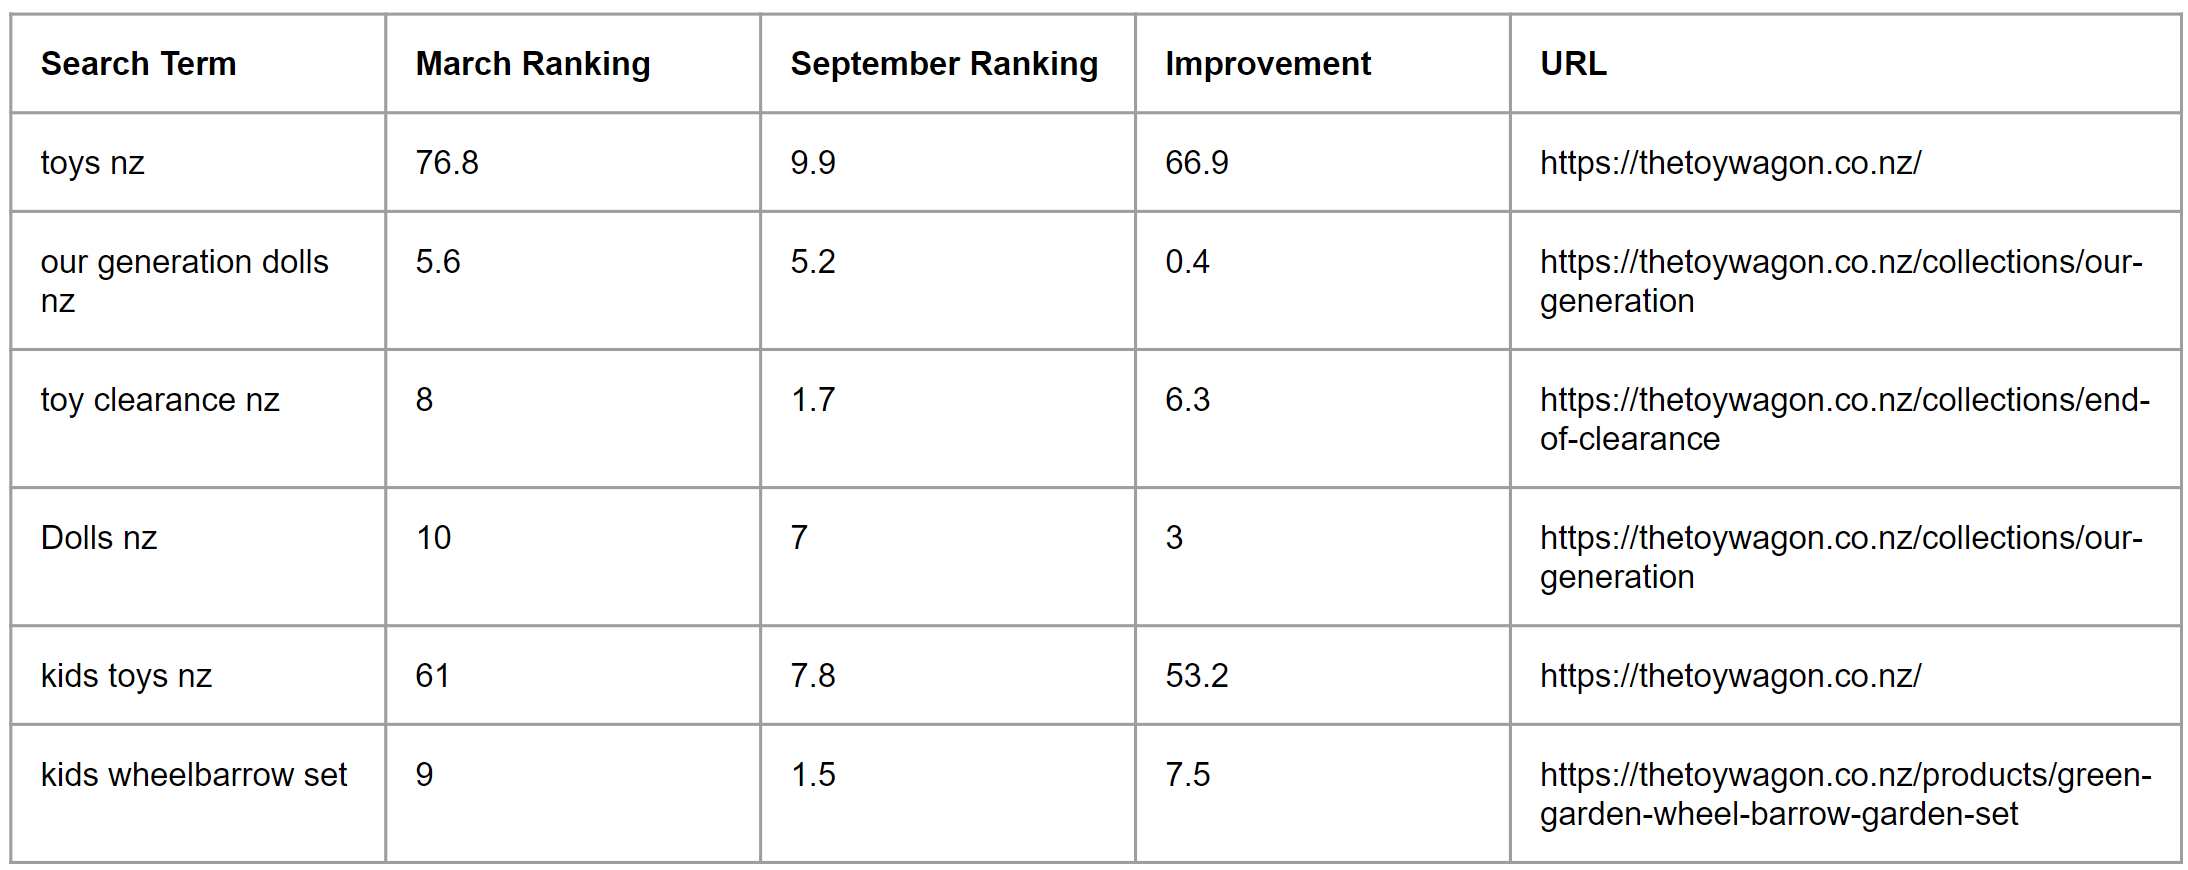 A table shows the key words, different months' ranking numbers, improvement numbers, and URL address.